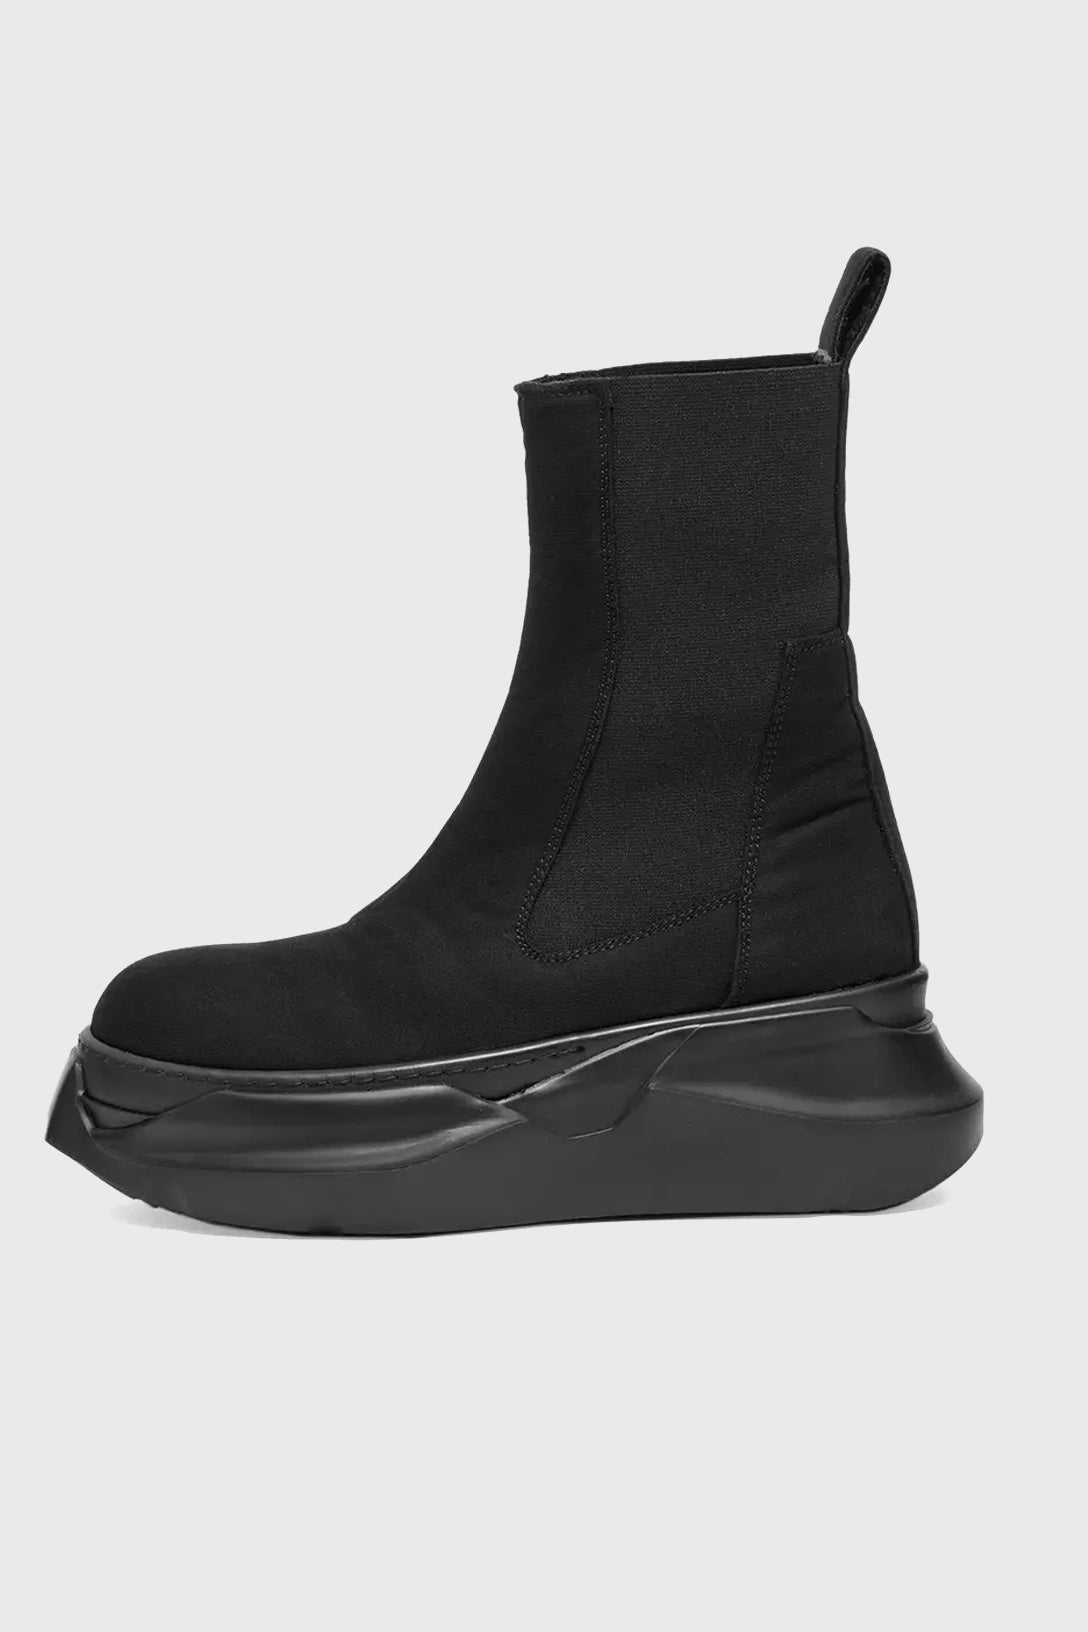 Beatle Abstract Boots - Black/black in Black - The Shelter